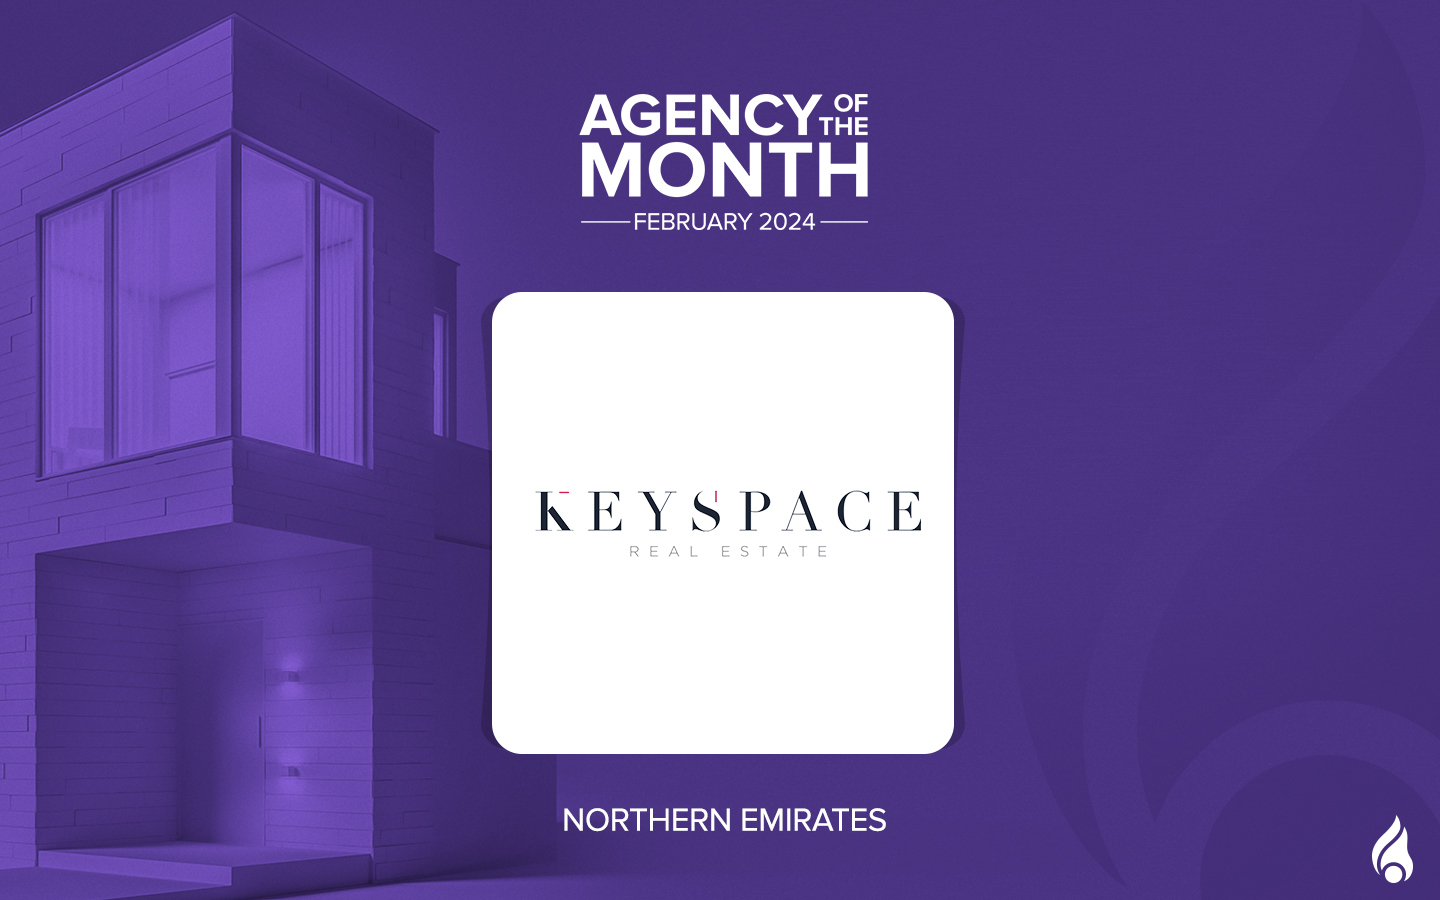 Agency of the month Northern Emirates February 2024